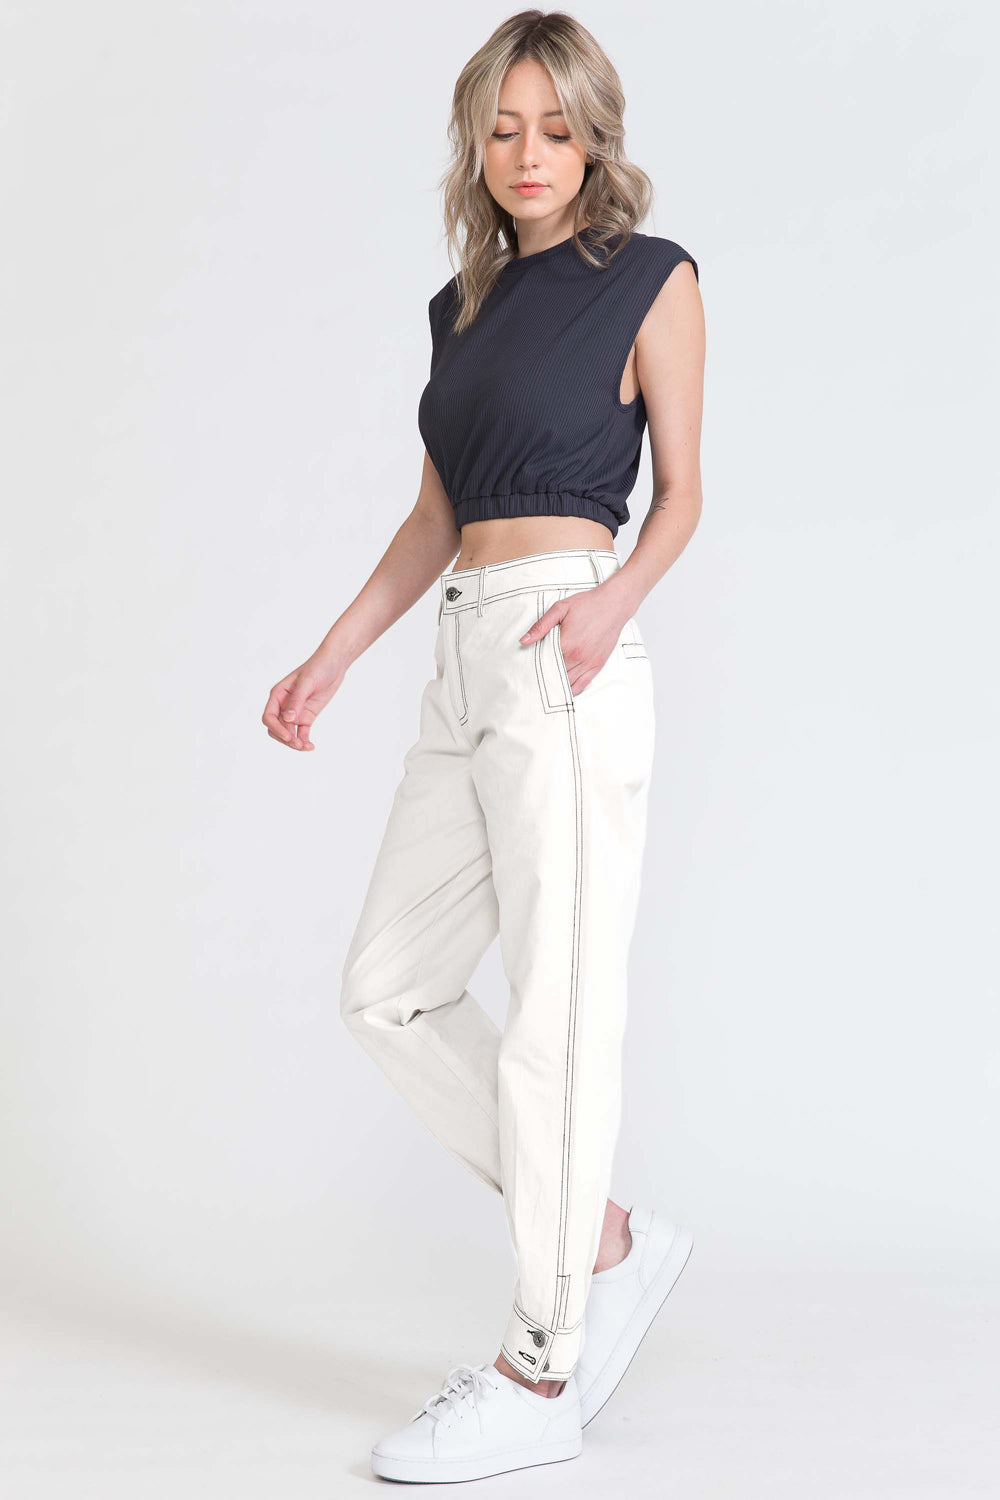 Over Stitched Pegged Long Pant